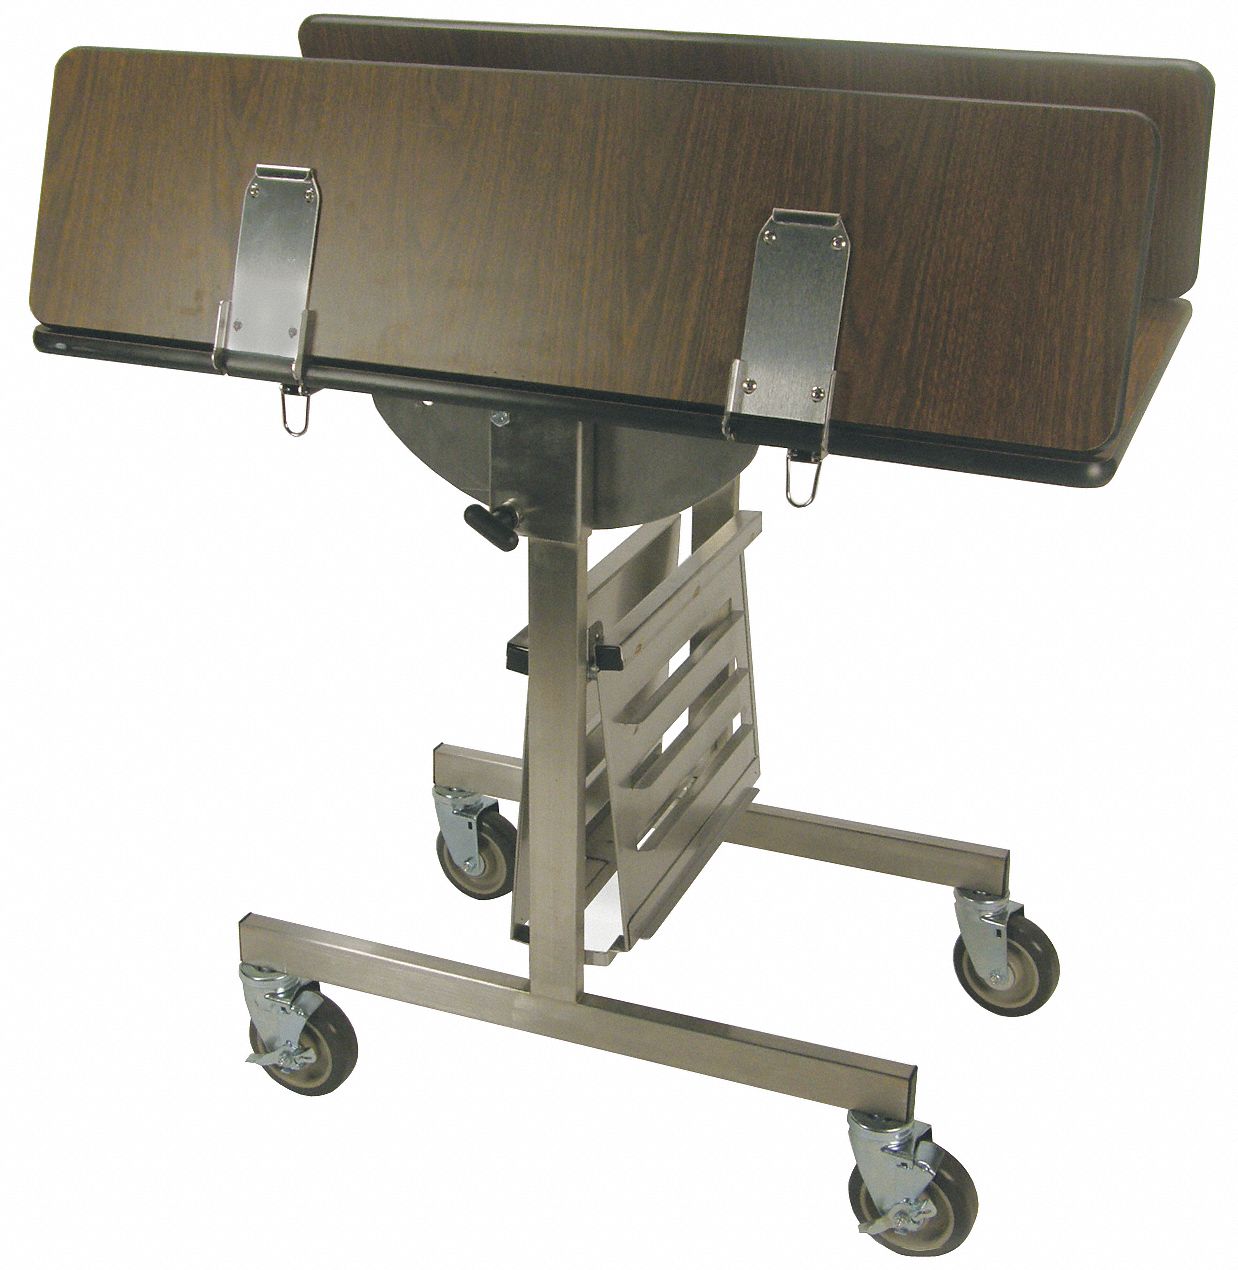 Tri-Fold Room Service Table: Square, 31 in Overall Ht, 36 in Overall Lg, 36 in Overall Wd